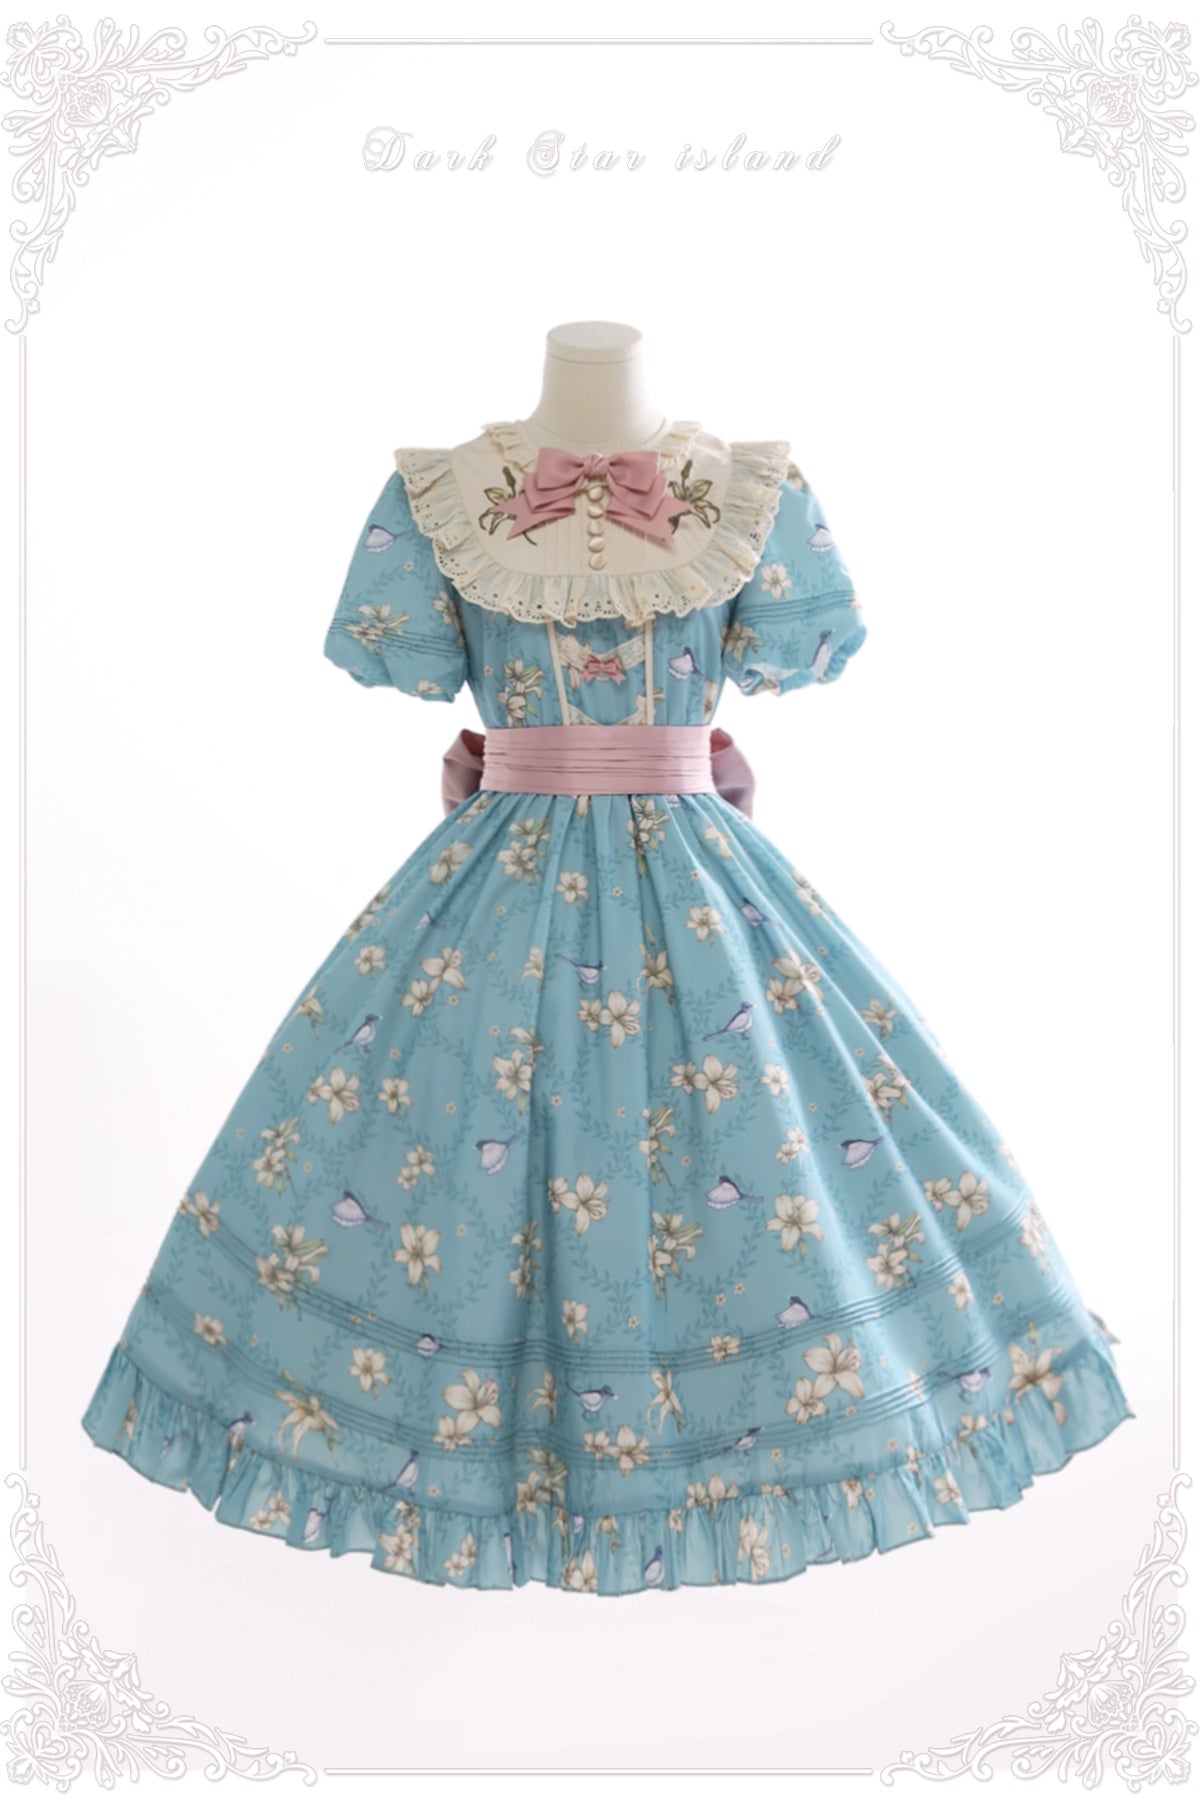 Dark Star Island~Lily&Mountain Breeze~Lily Printed Embroidery Lolita Long/Short OP S Long OP in blue 